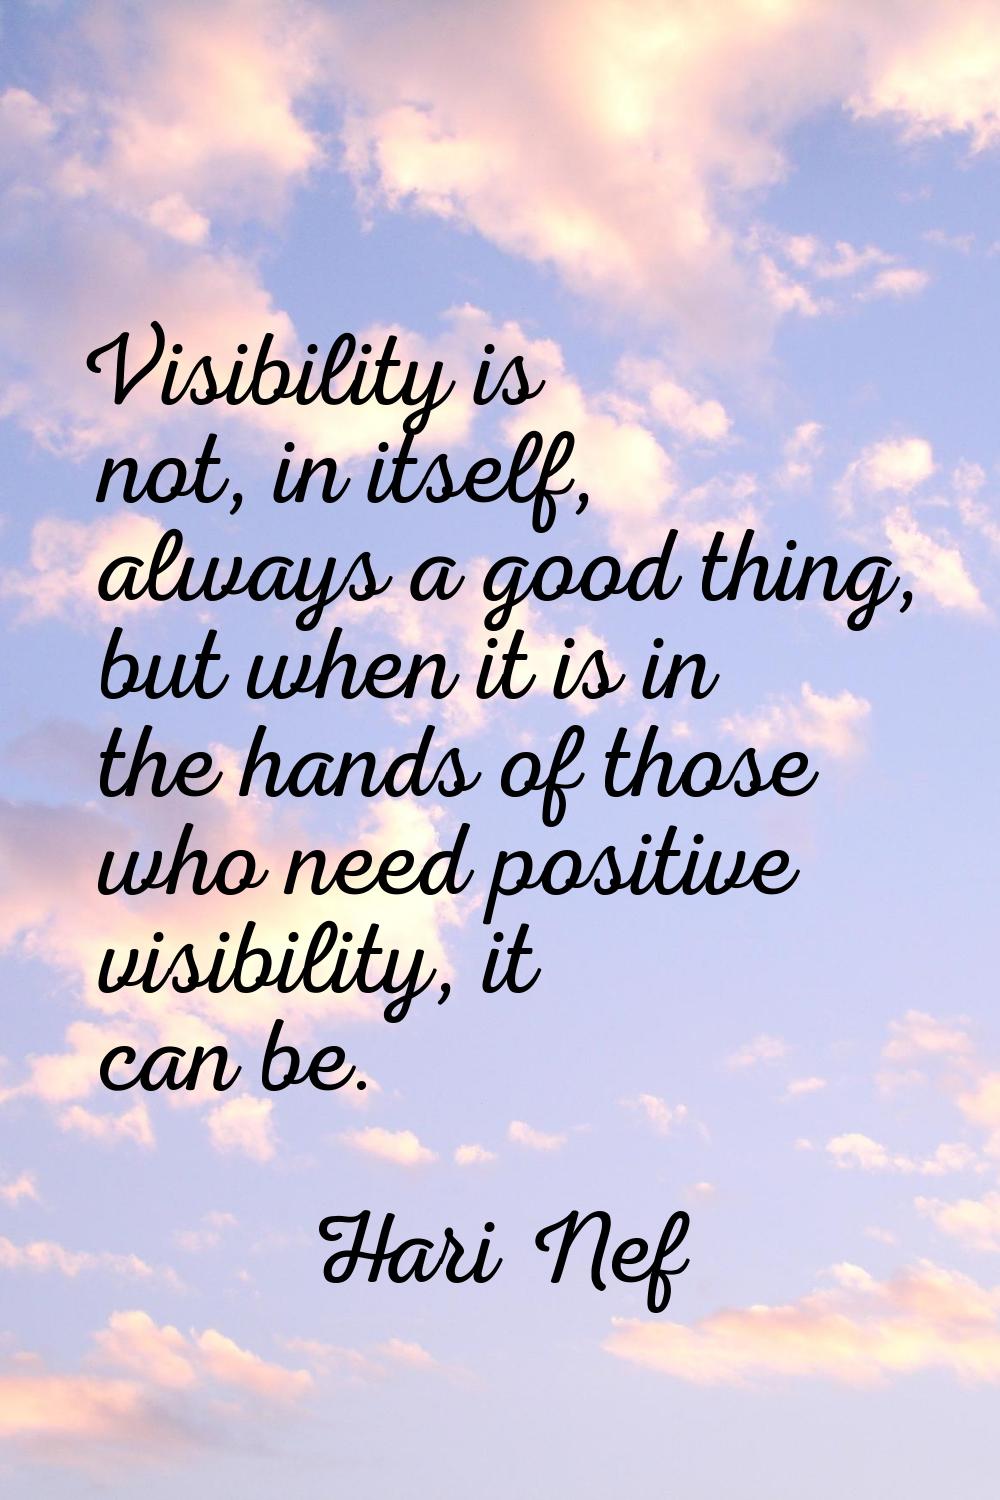 Visibility is not, in itself, always a good thing, but when it is in the hands of those who need po